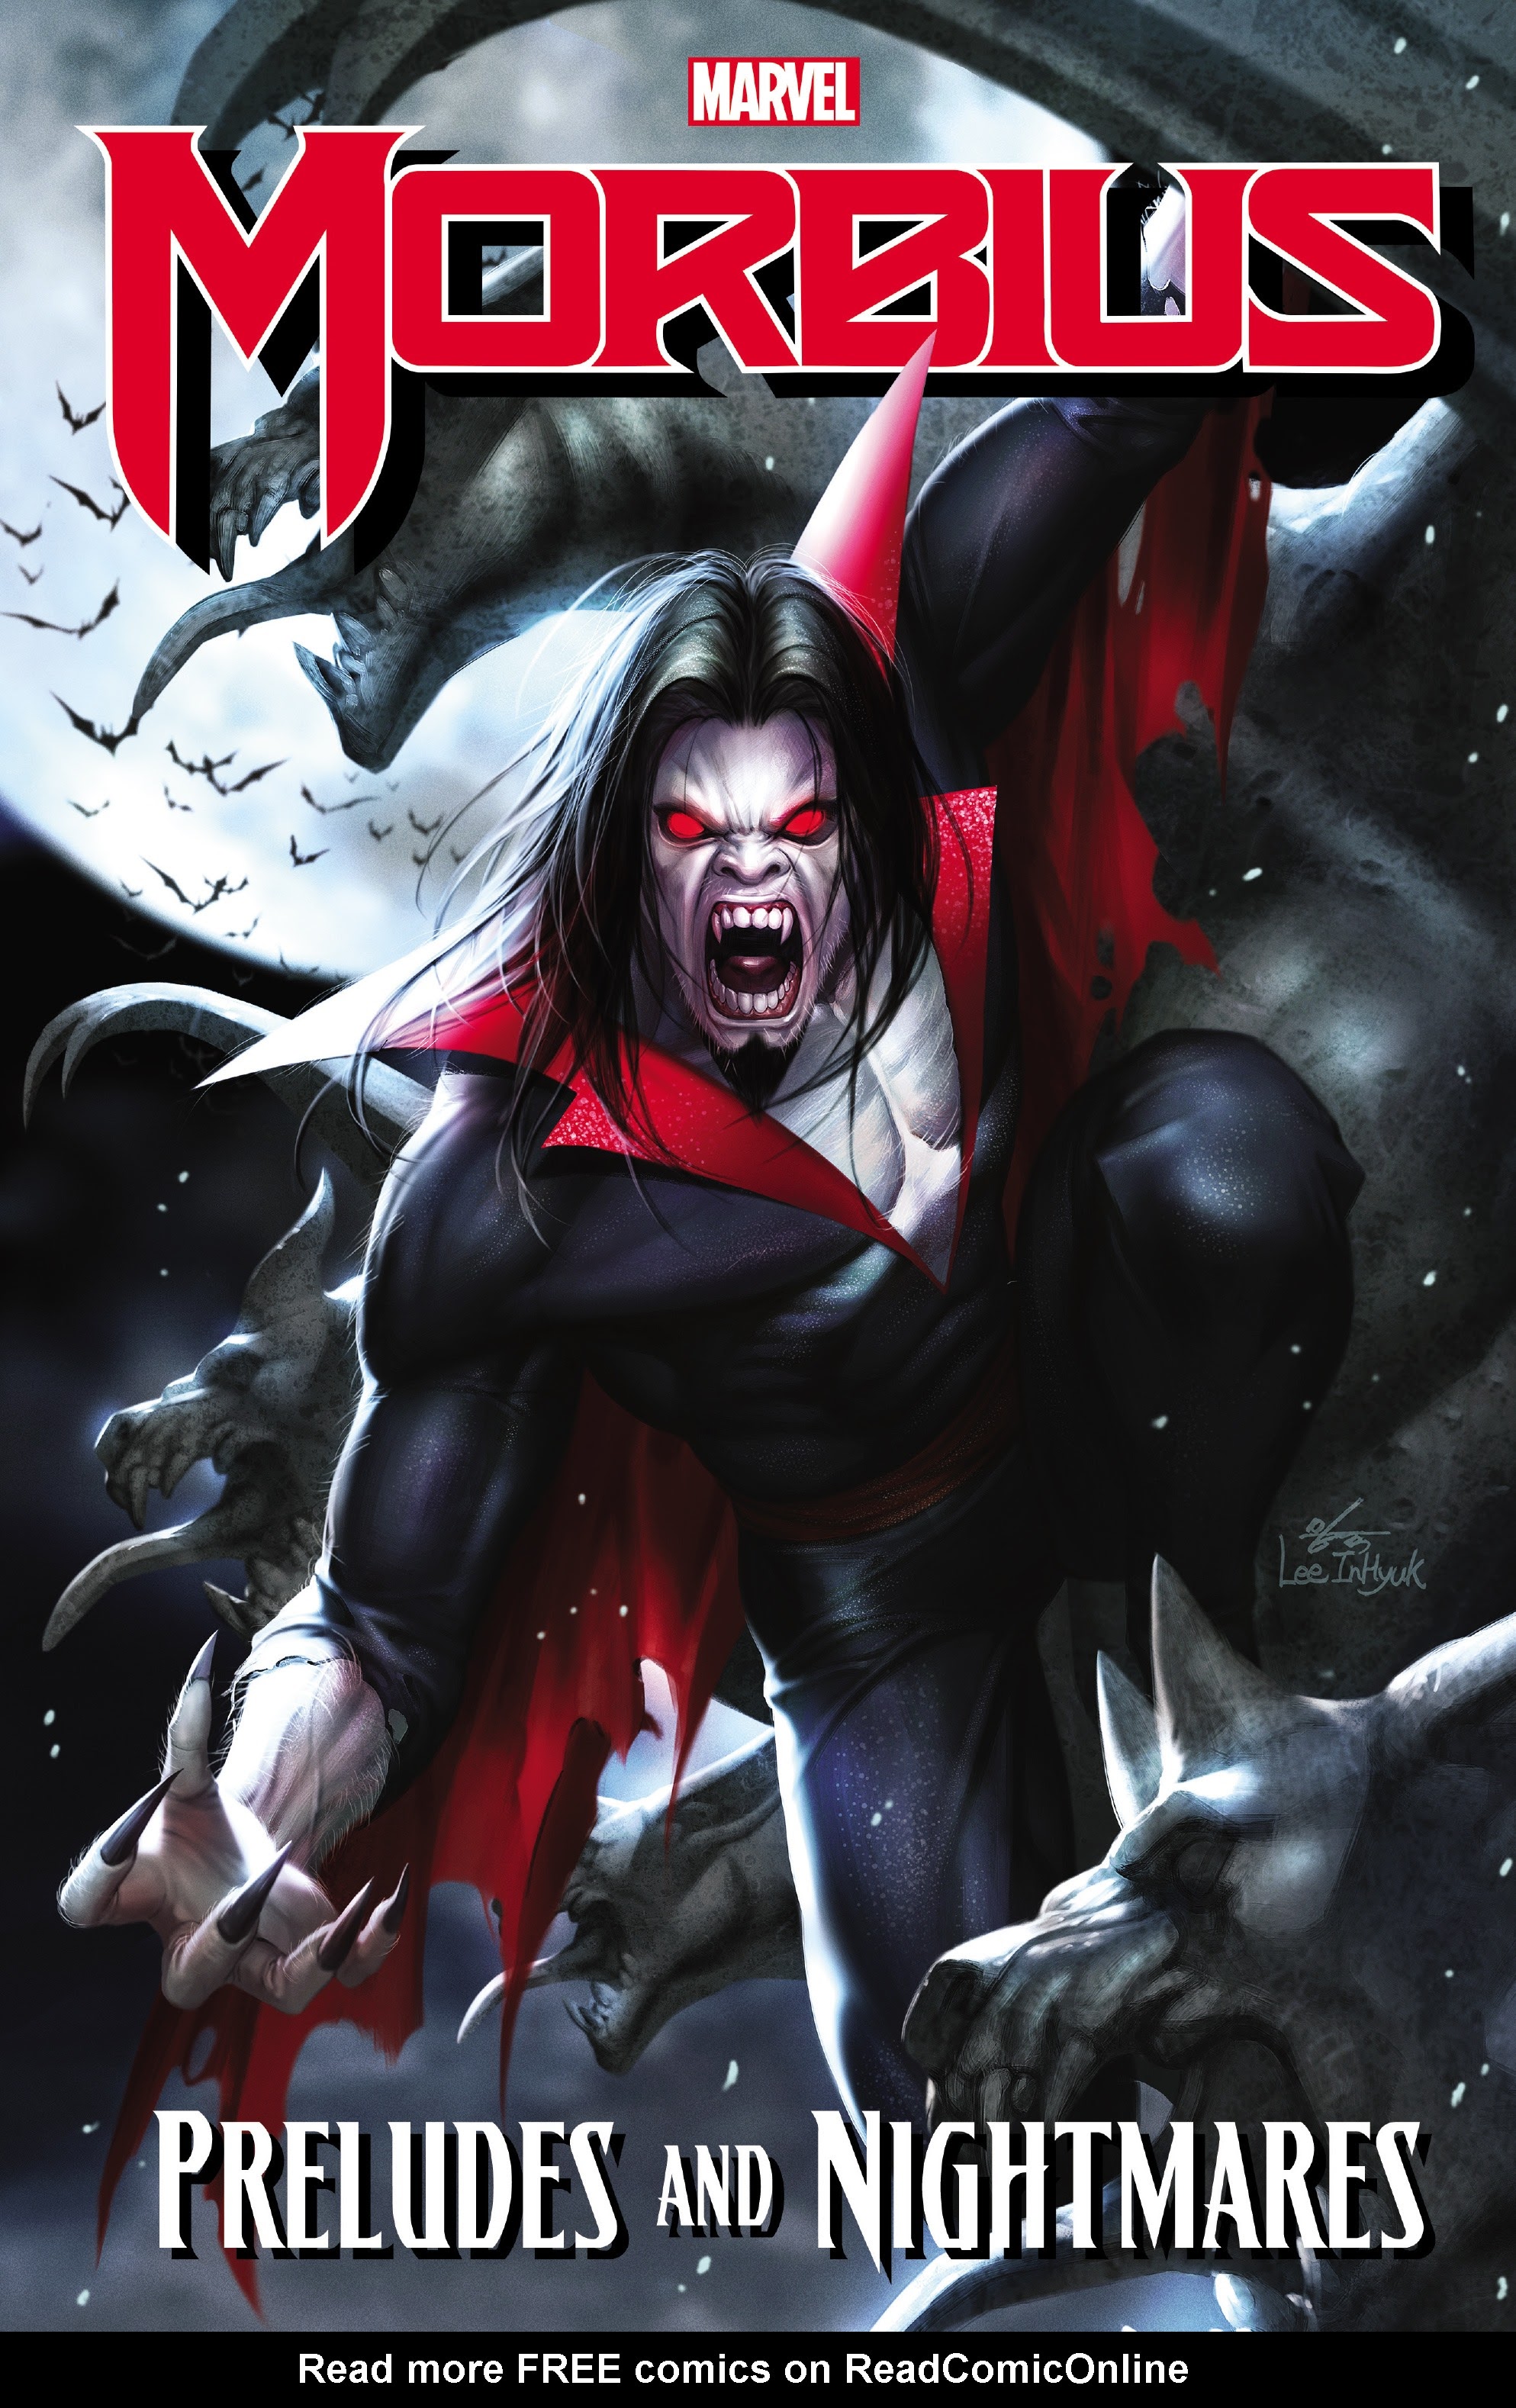 Read online Morbius: Preludes and Nightmares comic -  Issue # TPB - 1